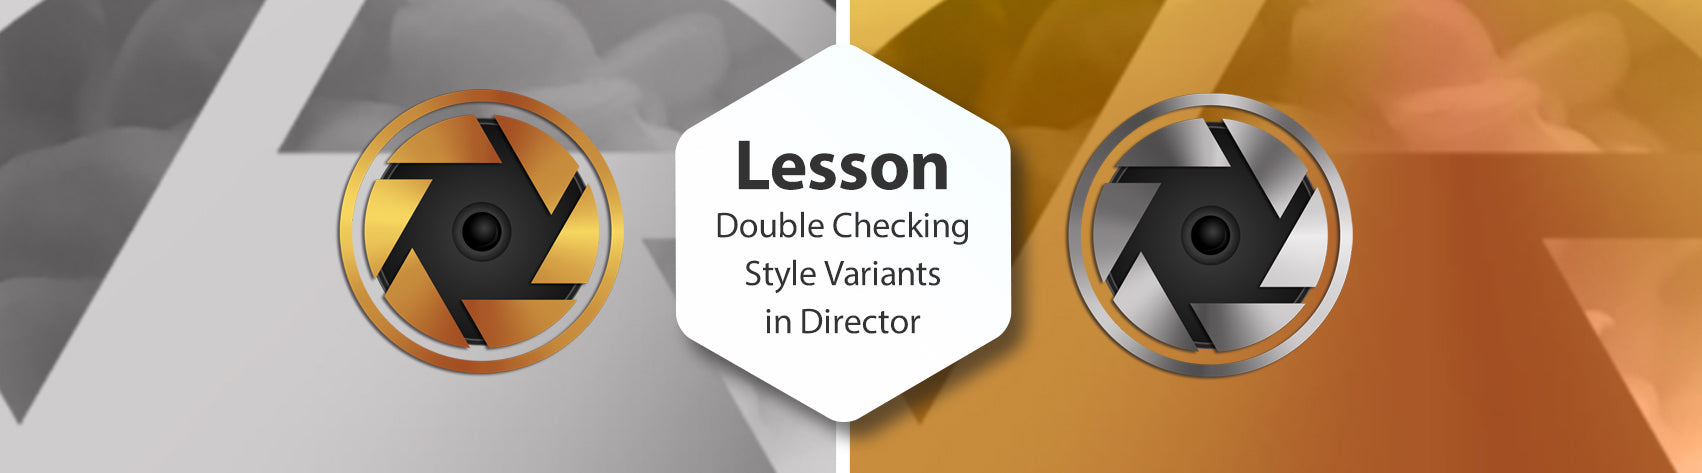 Lesson - Double Checking Style Variants in Director